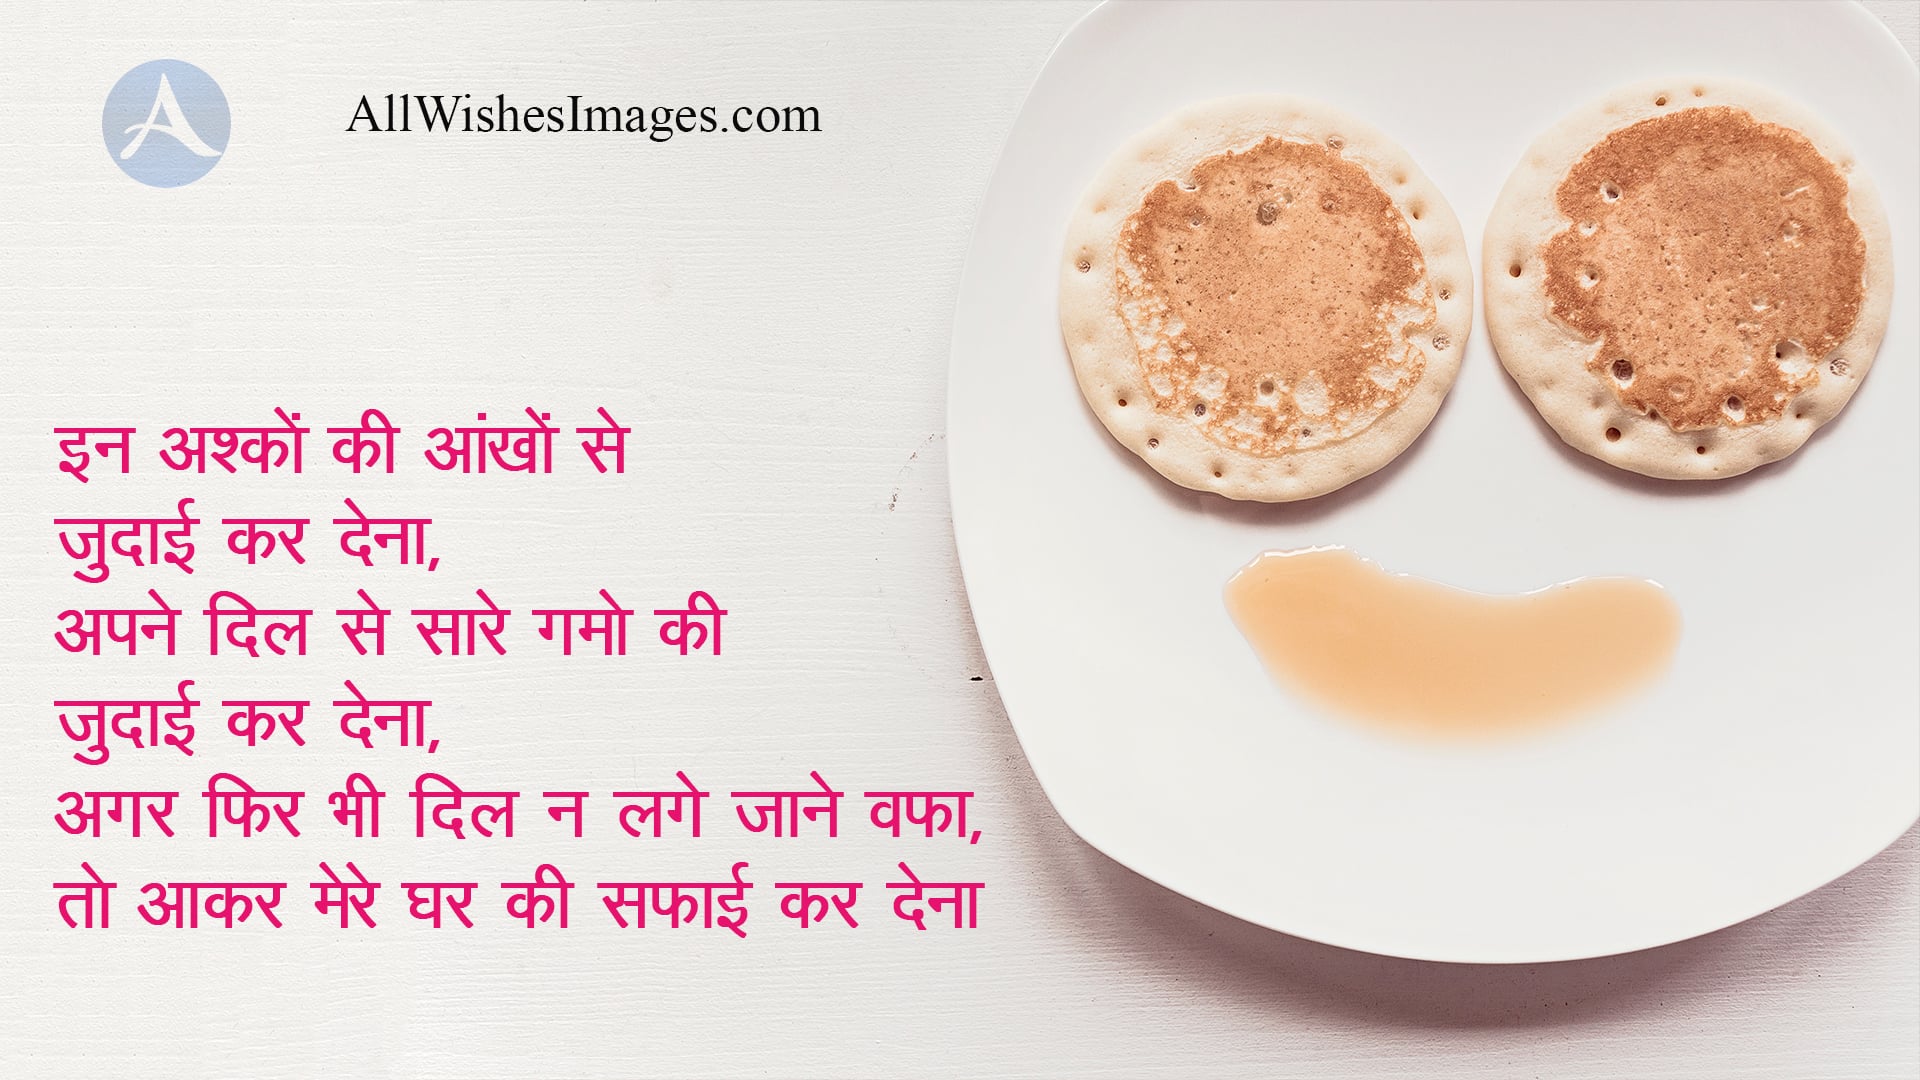 Funny Shayari In Hindi Hd Image - All Wishes Images - Images for WhatsApp